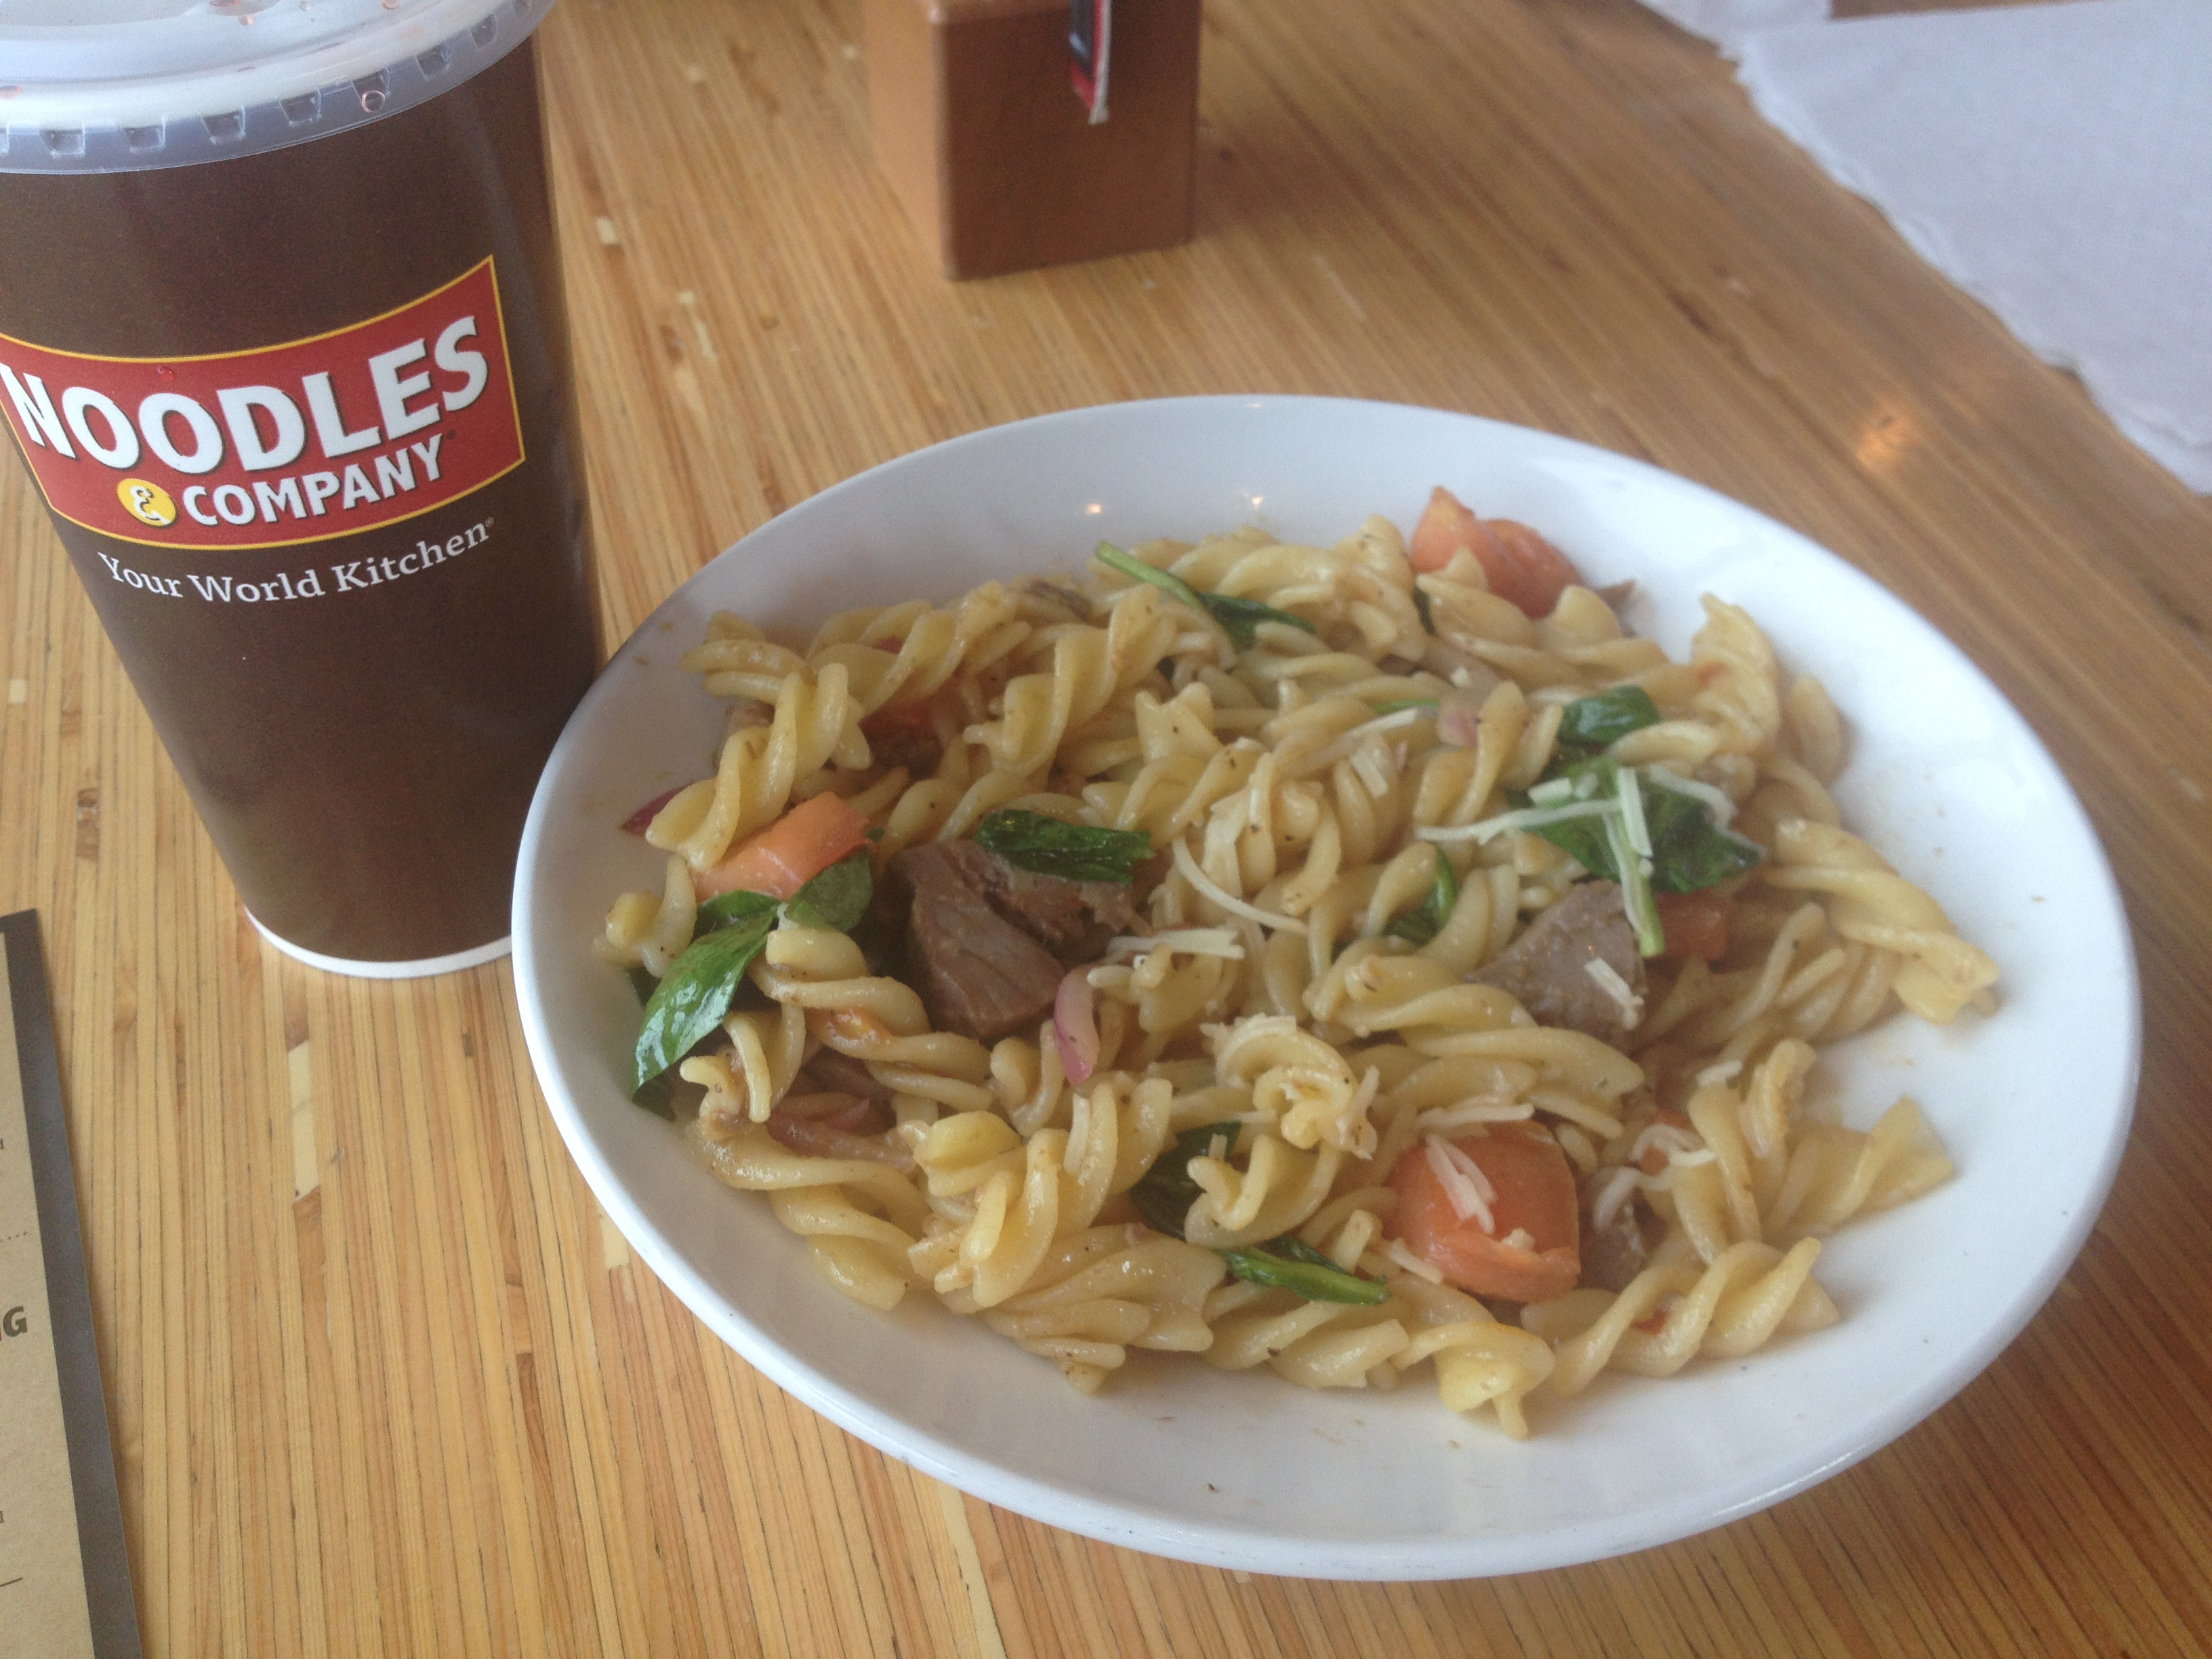 Noodles And Company Healthy
 How to Successfully Eat Gluten Free at Noodles & pany